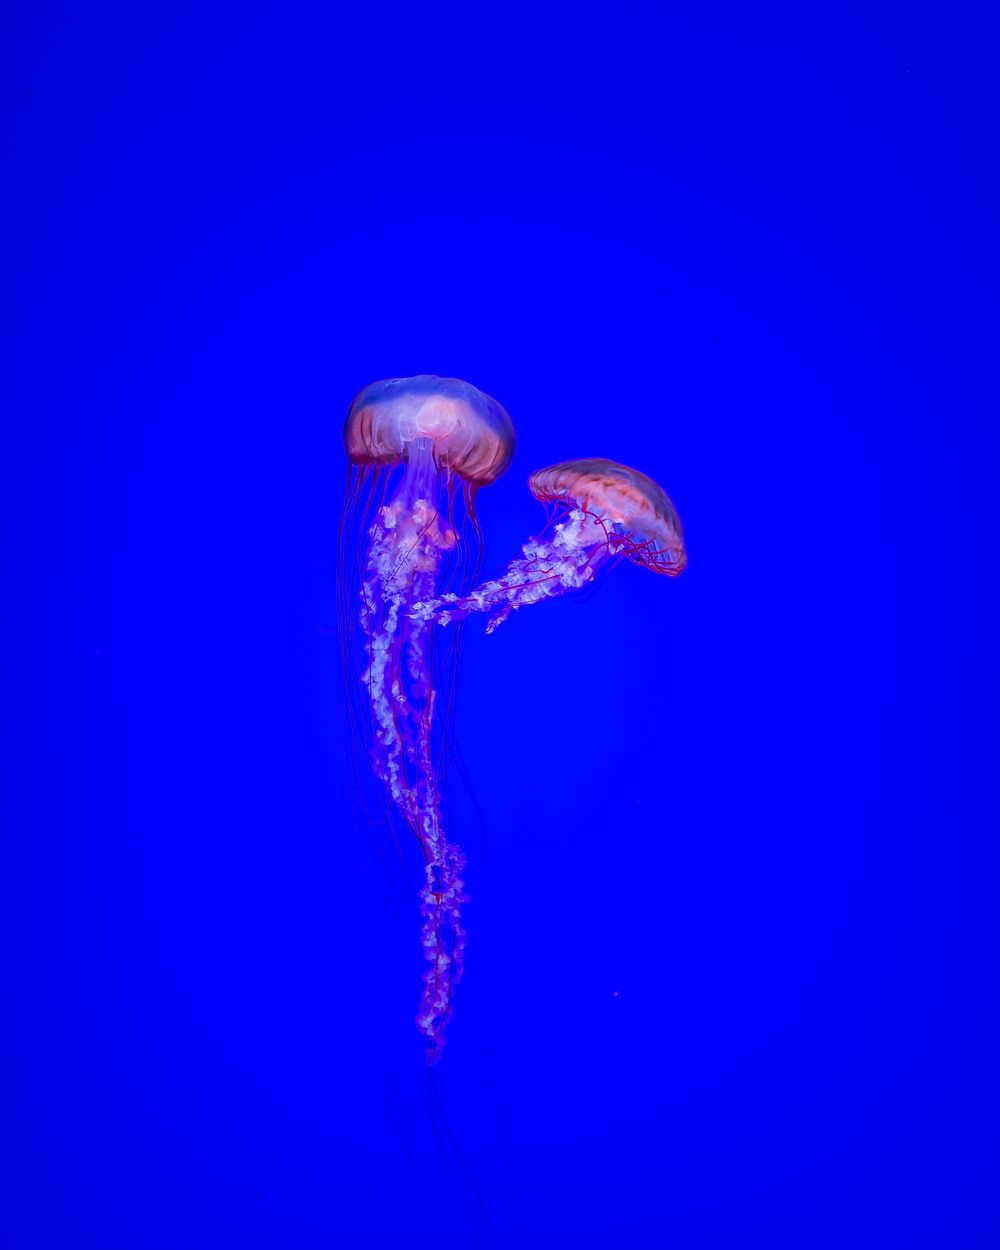 Jelly fish in deep ocean. Original public domain image from Wikimedia Commons